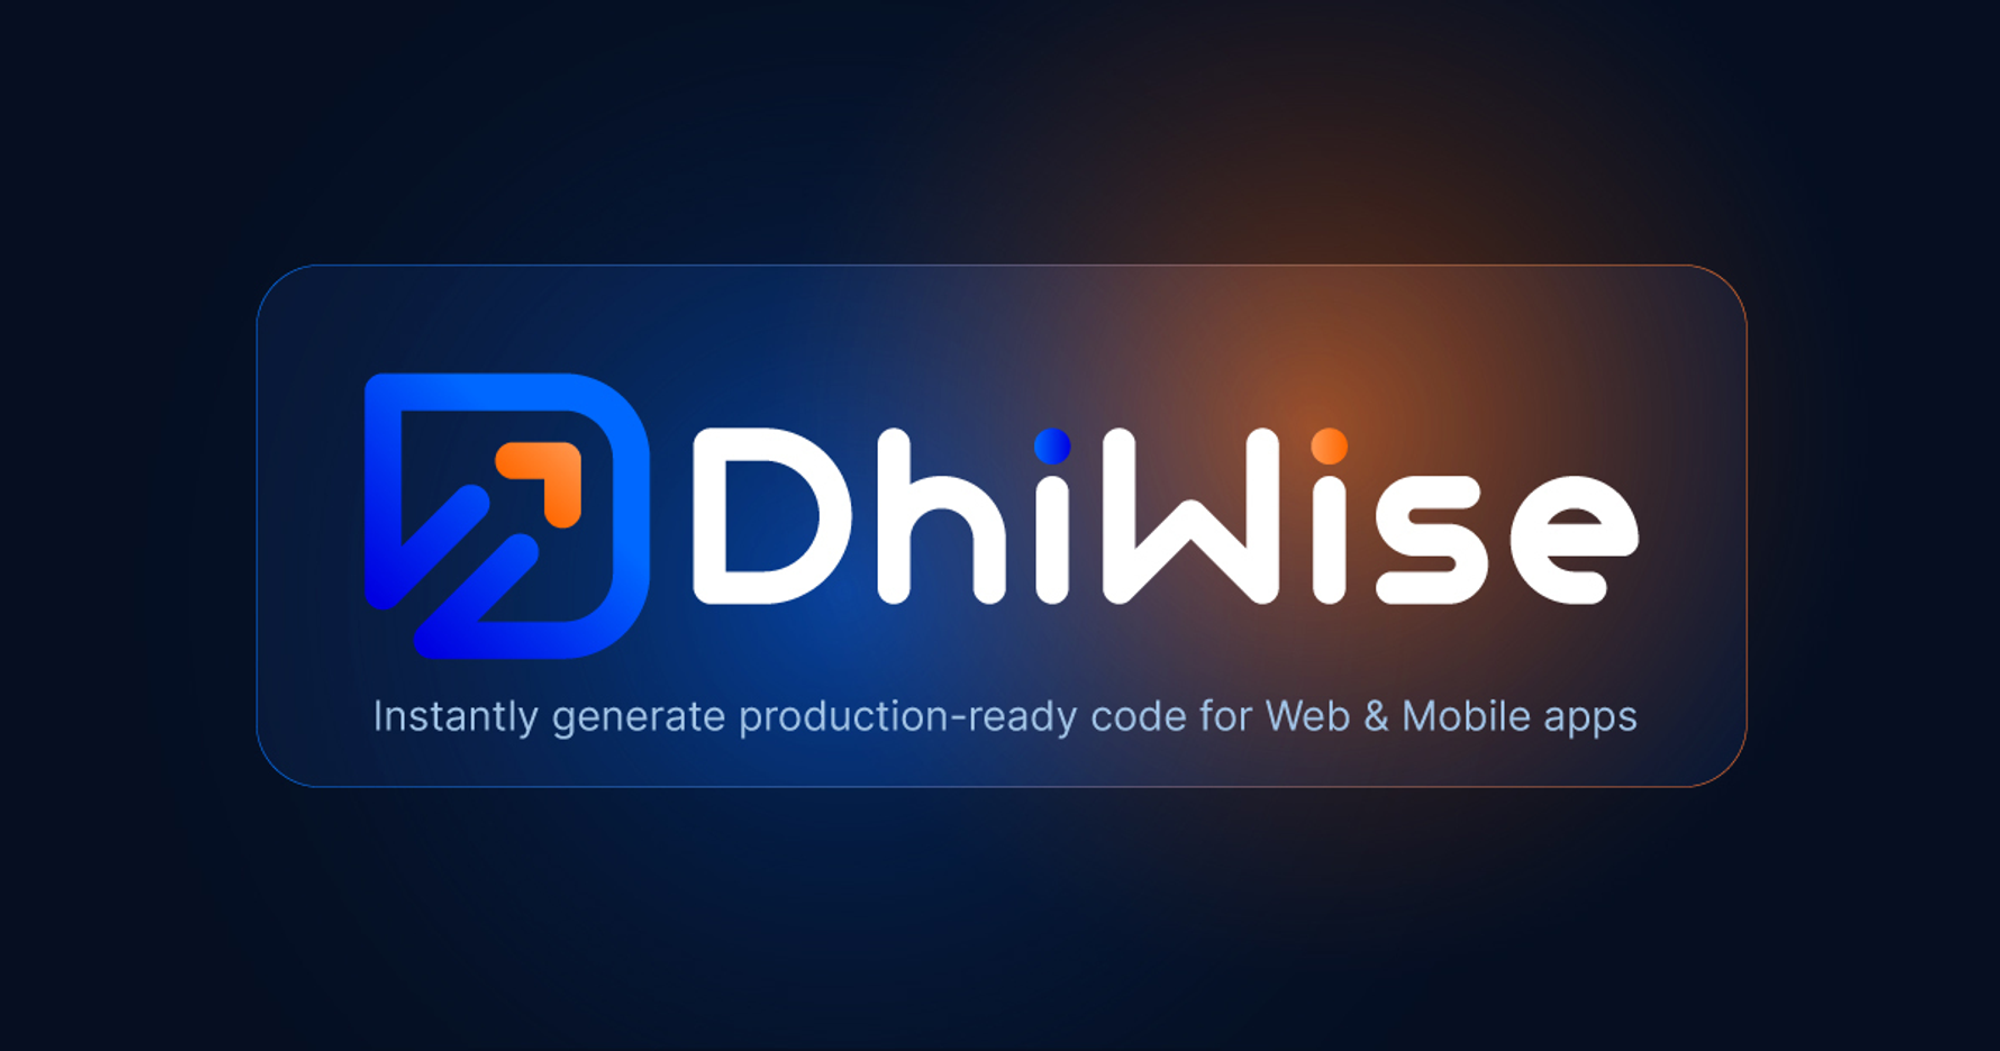 Here’s how I got selected at DhiWise